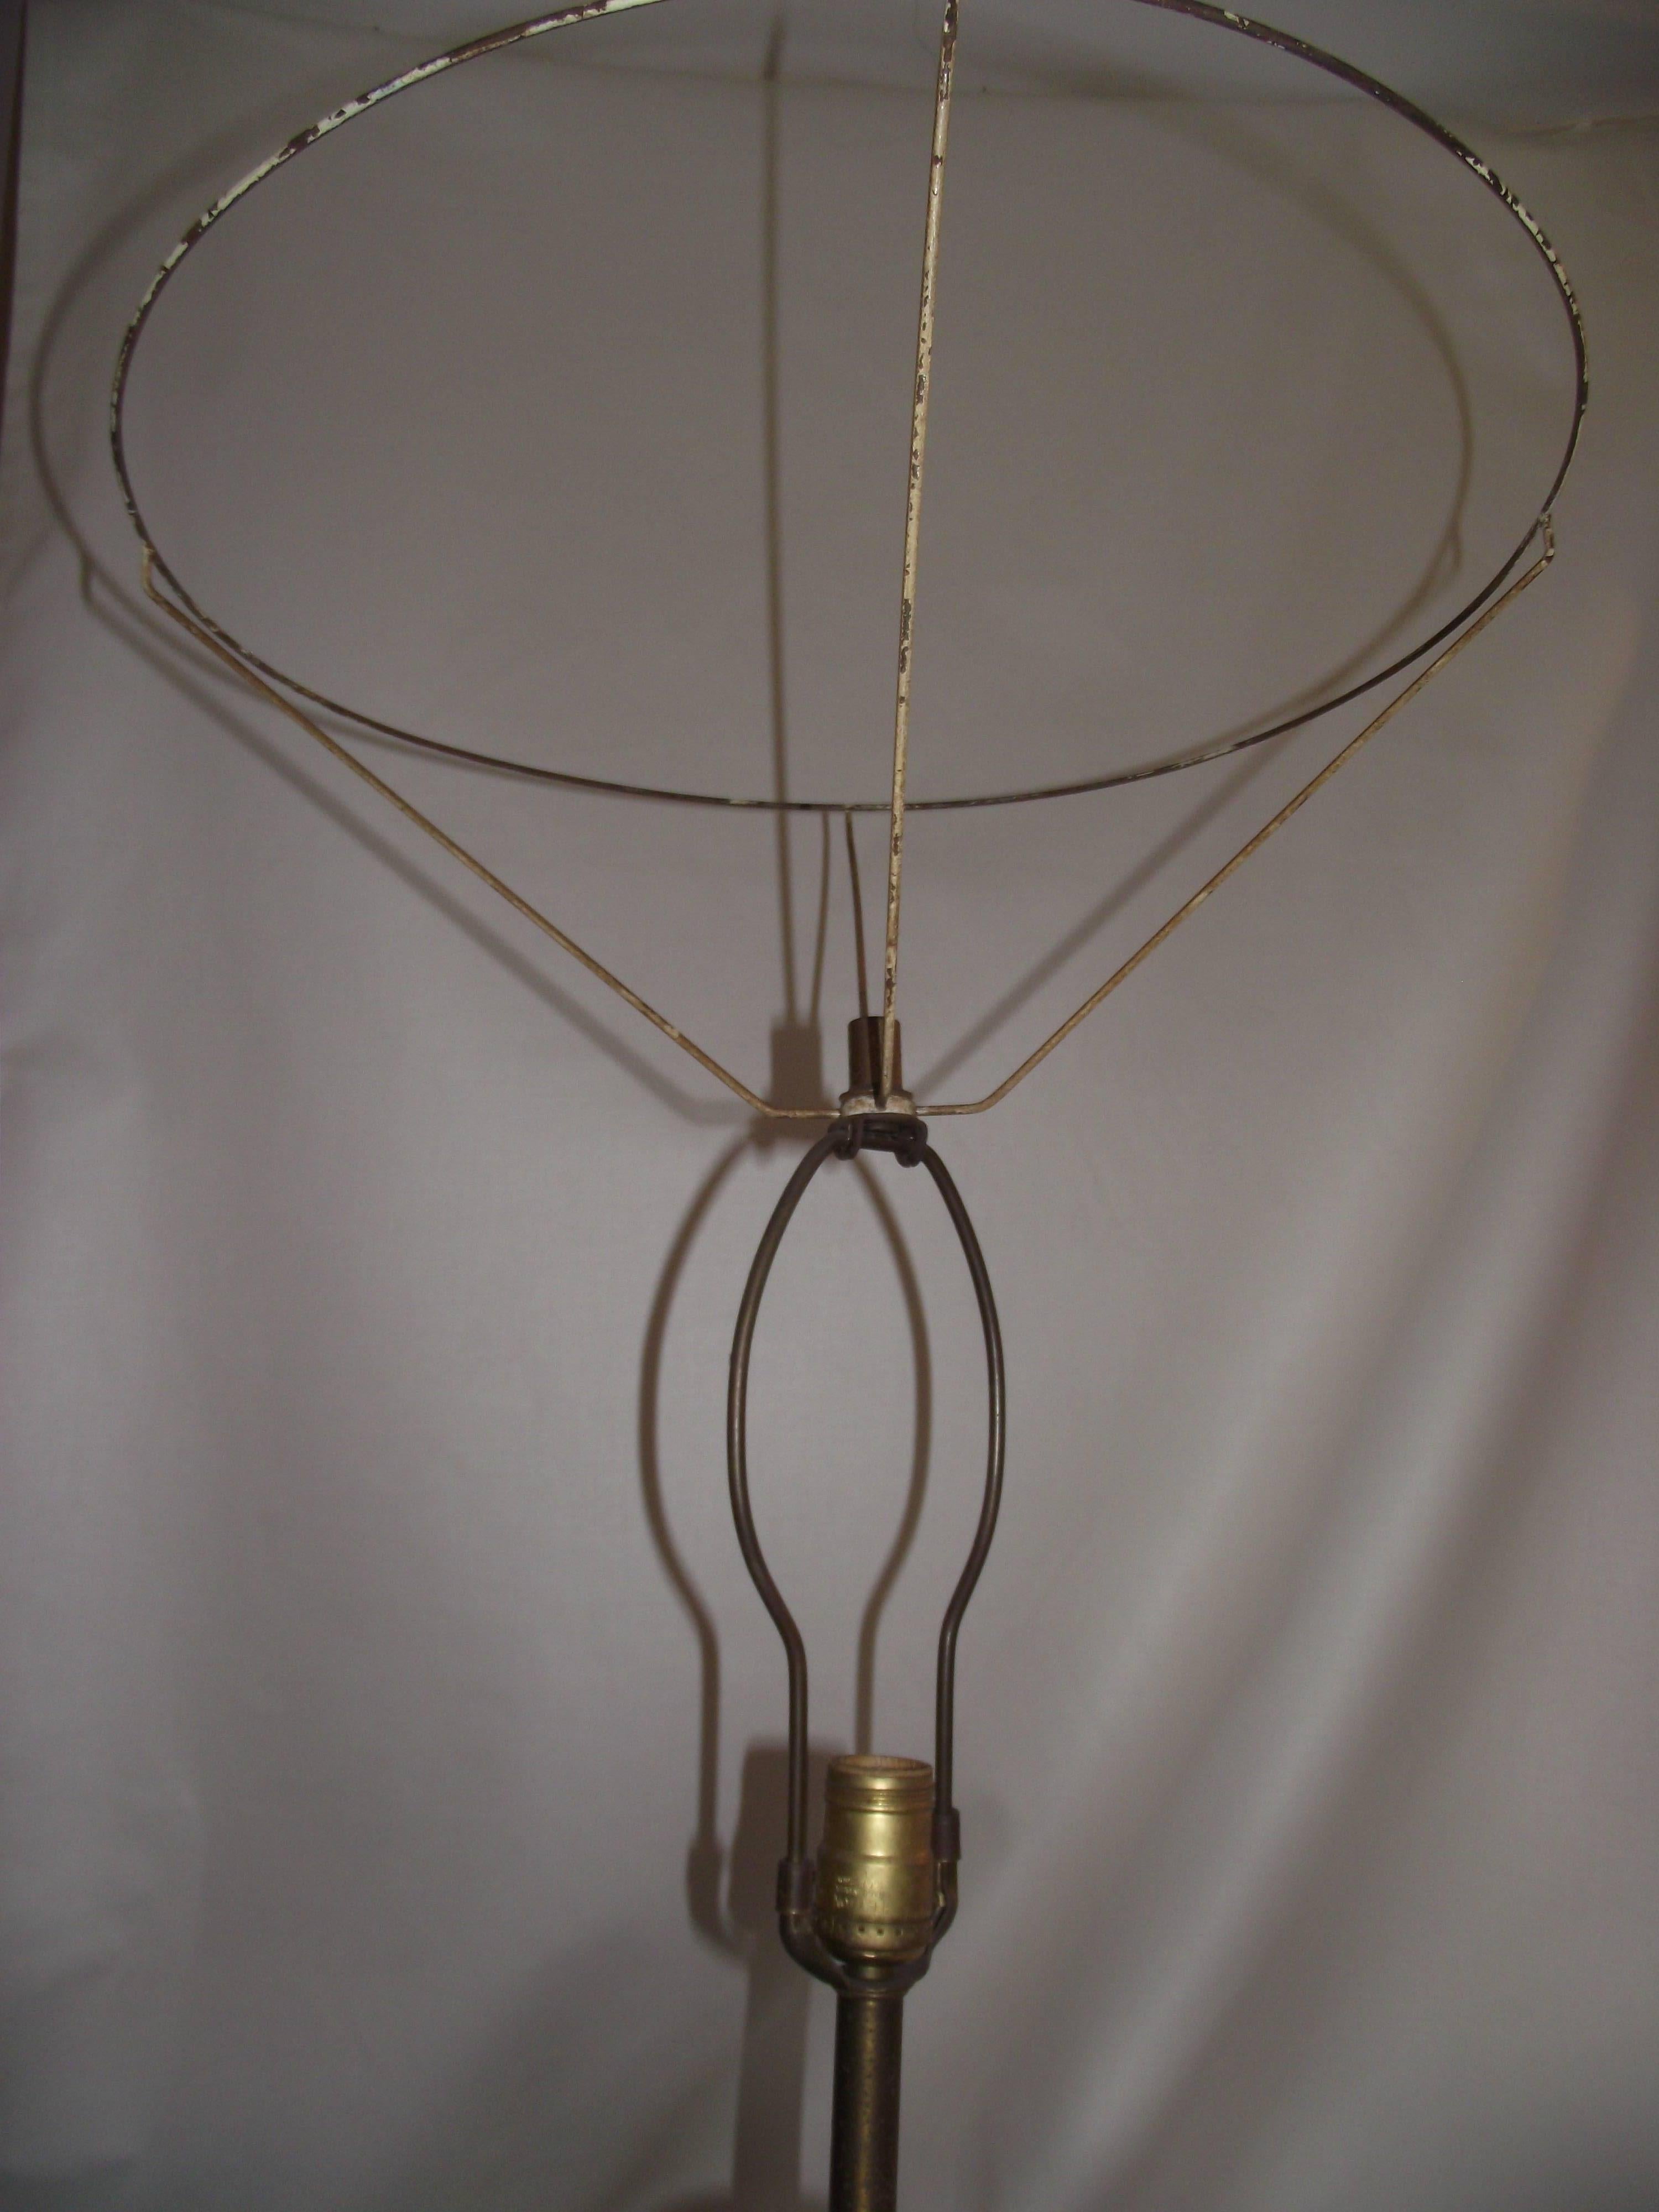 1960s Retro Lamp, Mid-Century Modern Lamp with Ceramic Base In Good Condition For Sale In Harrisburg, PA